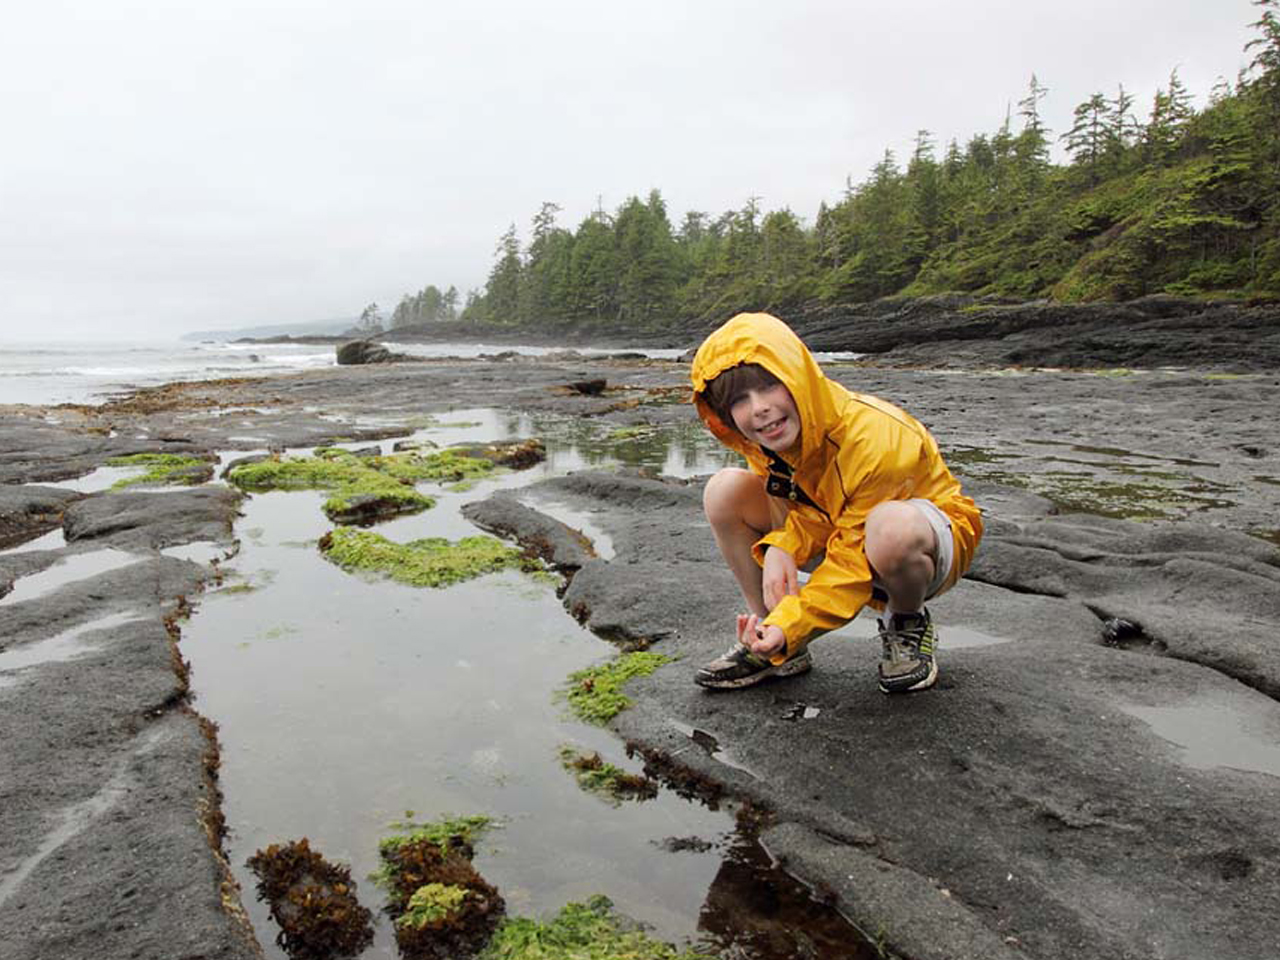 A child in a yellow raincoat squatting by a pool of water holding rocks in a cupped hand and smiling